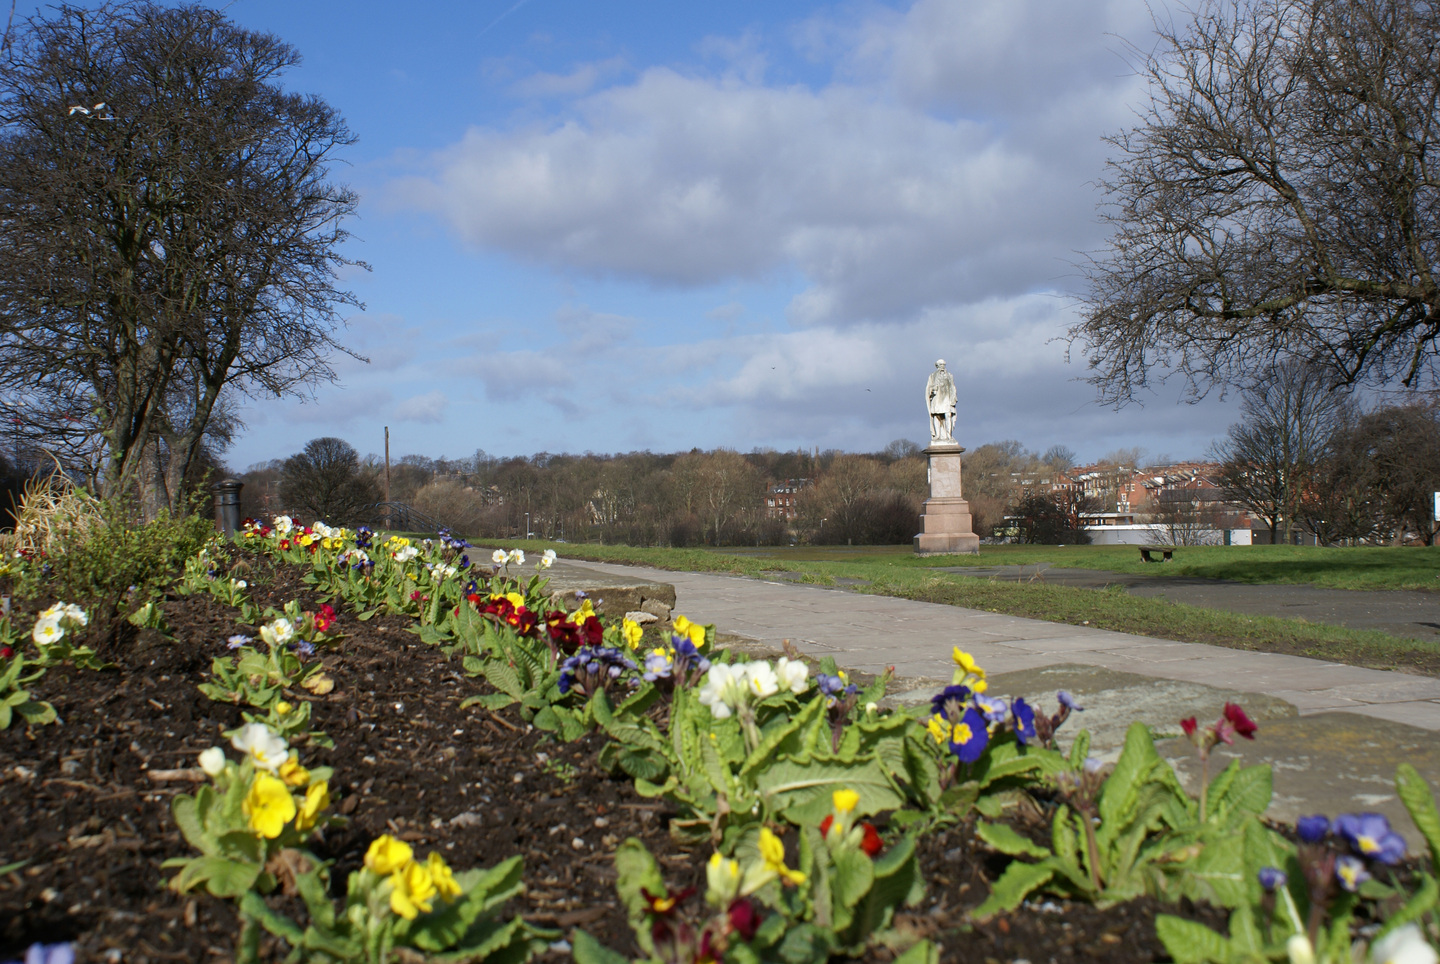 Student Accommodation in Hyde Park, Leeds - Flowers and statue of HR Marsden in Hyde Park, Leeds